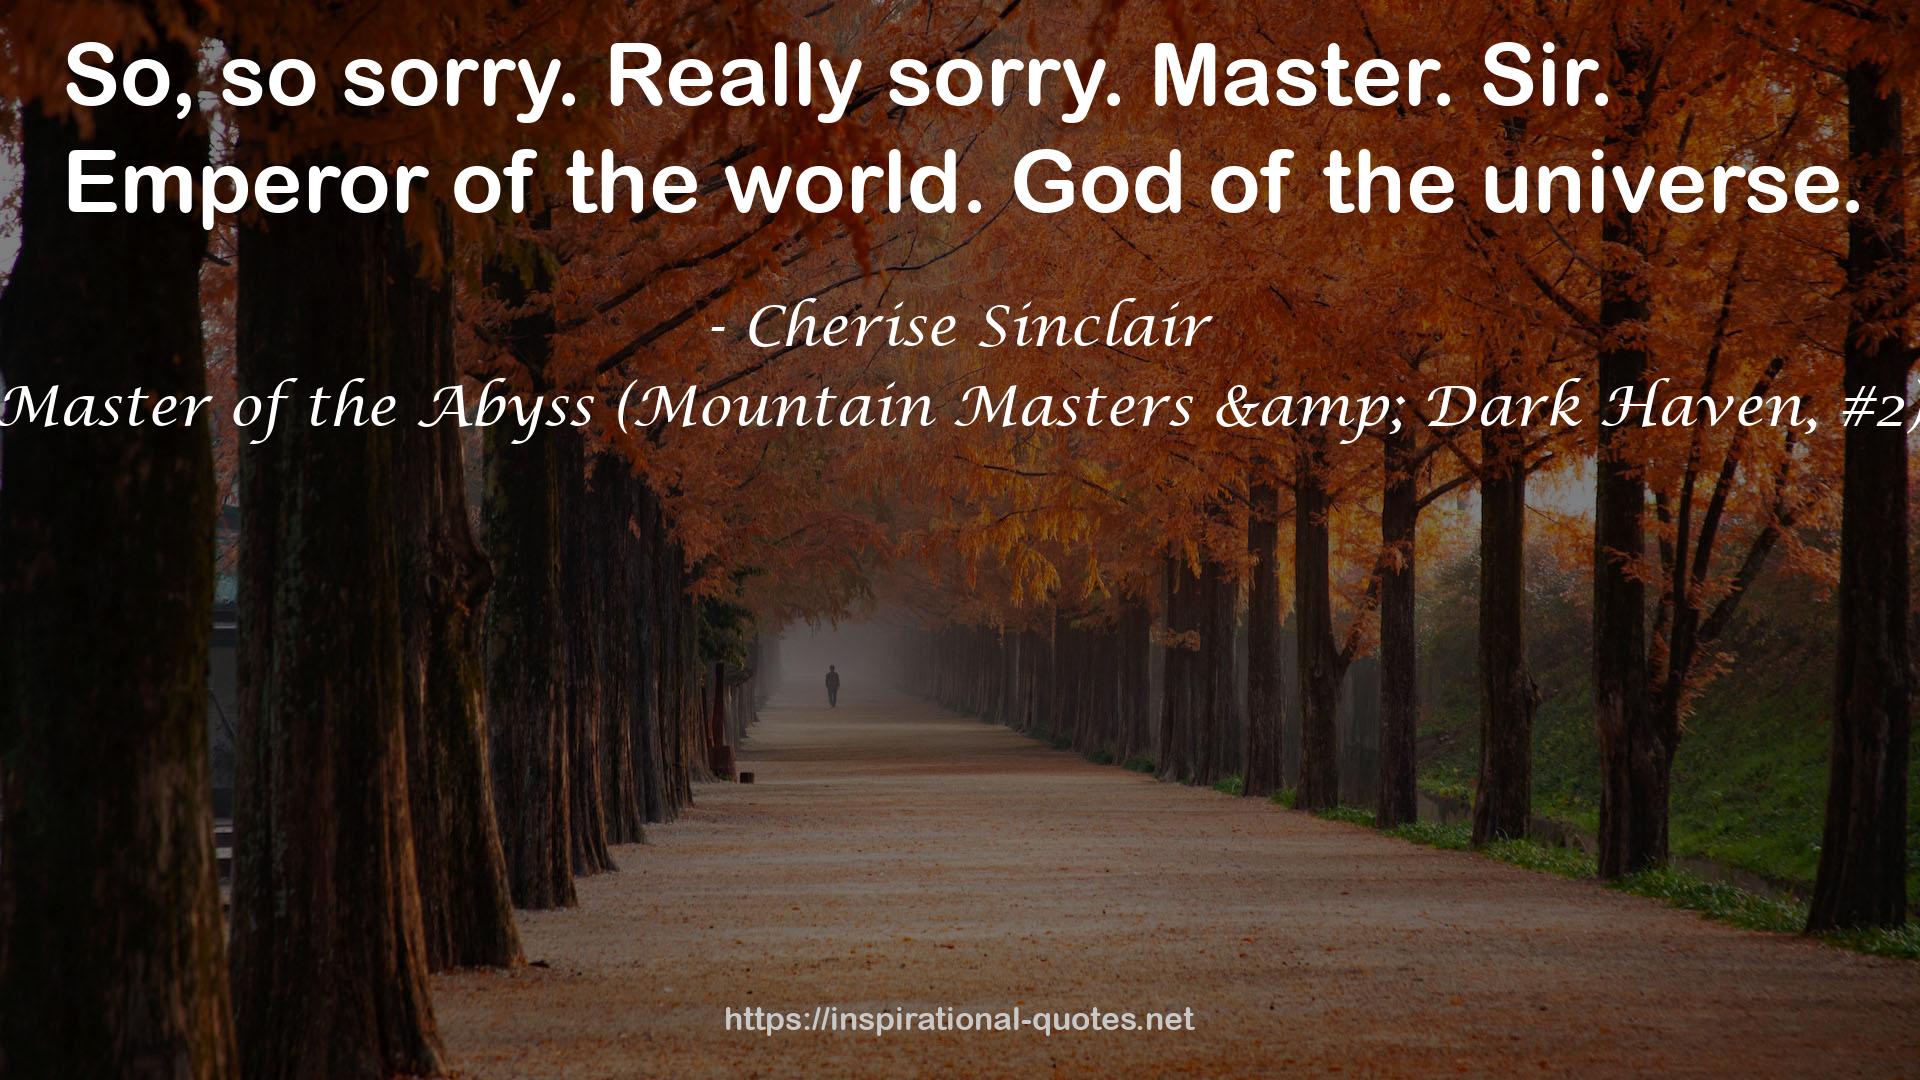 Master of the Abyss (Mountain Masters & Dark Haven, #2) QUOTES